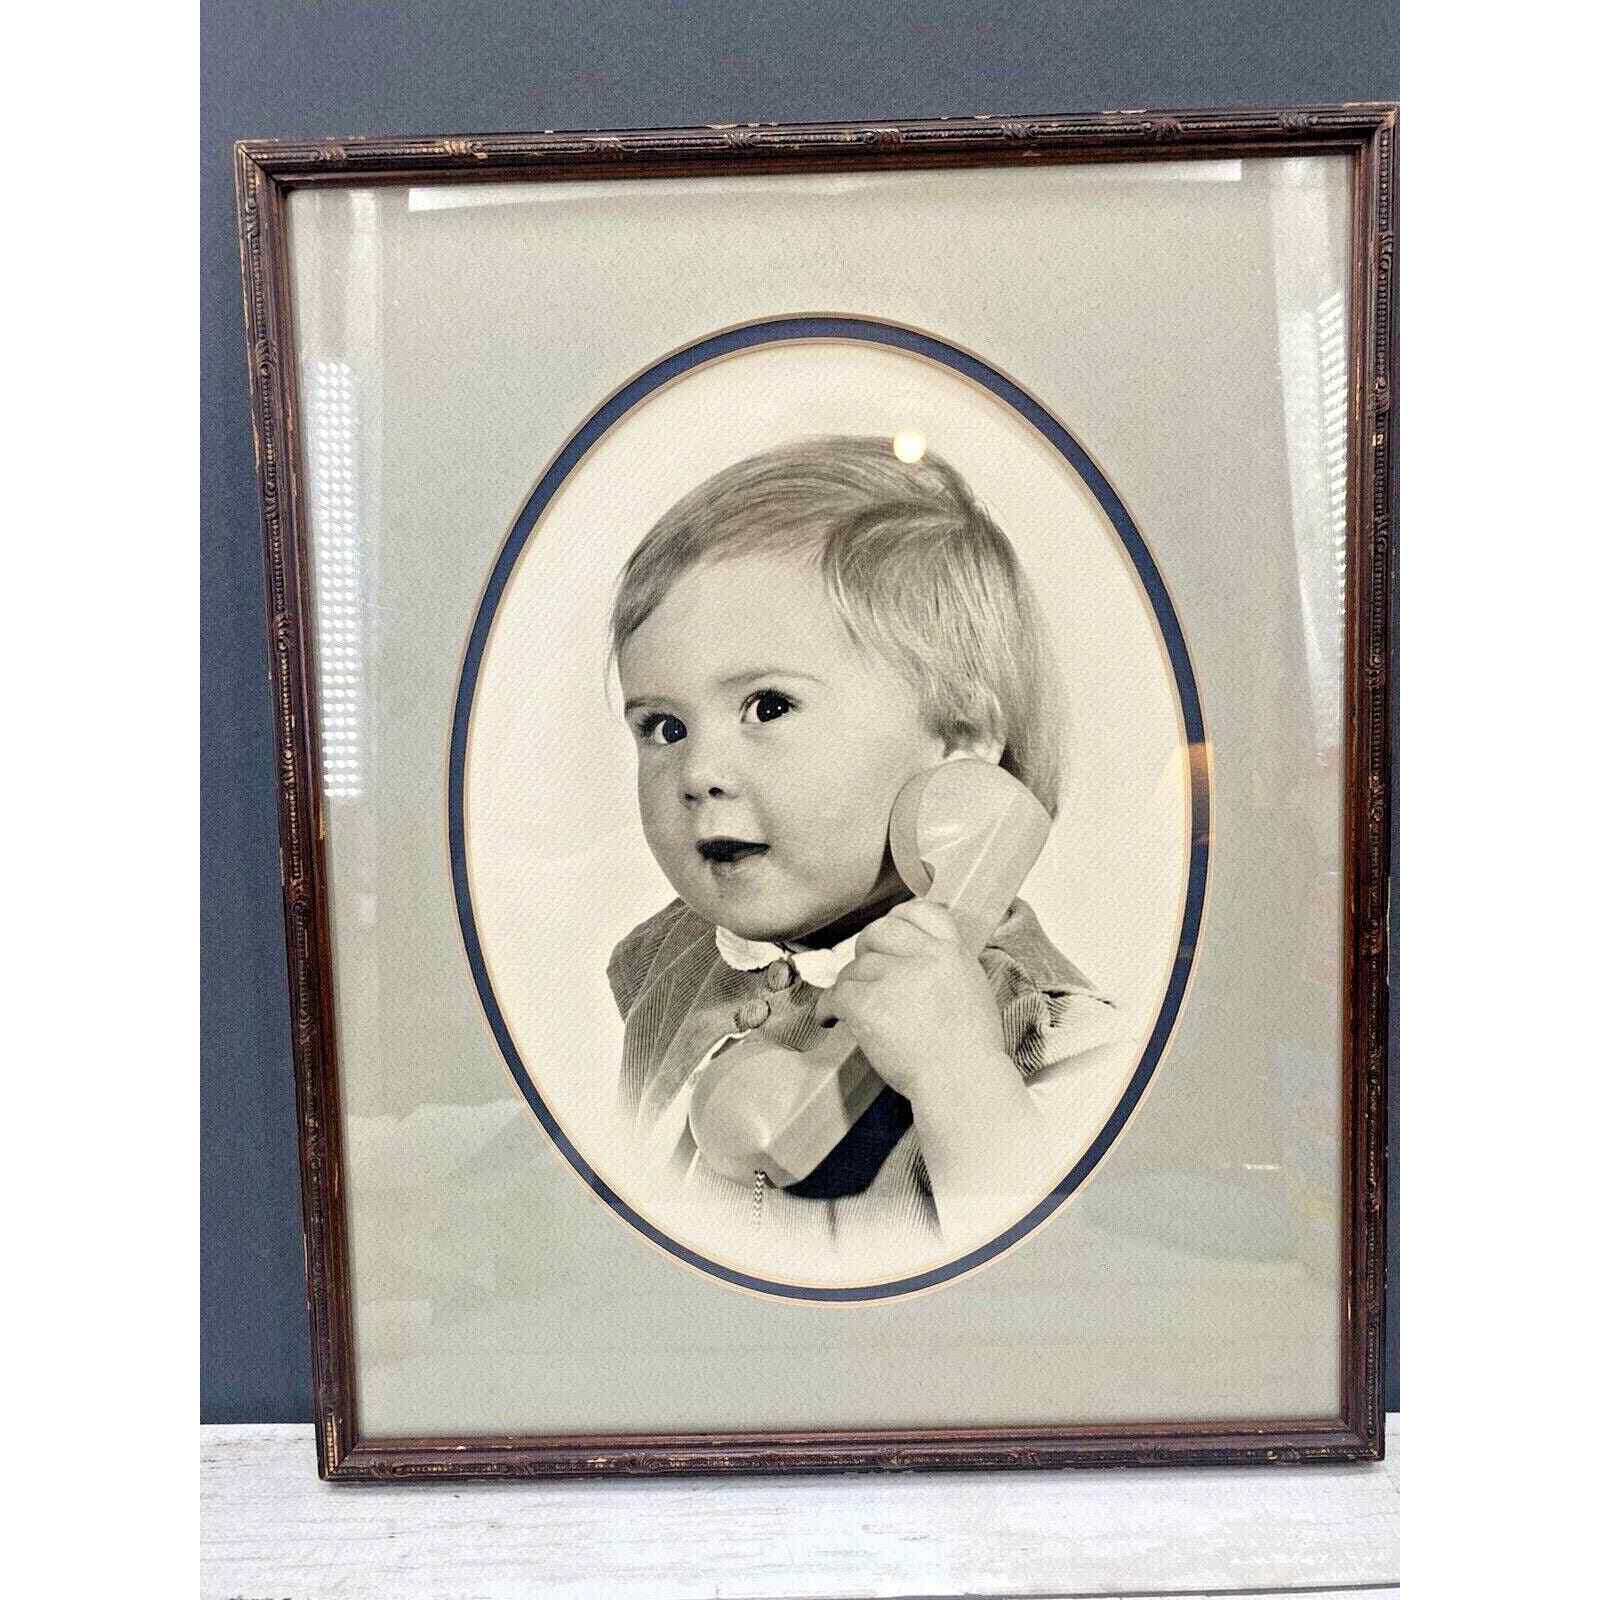 Antique Vintage Baby On Telephone Black White Photo Framed Picture MITRE BOX WI